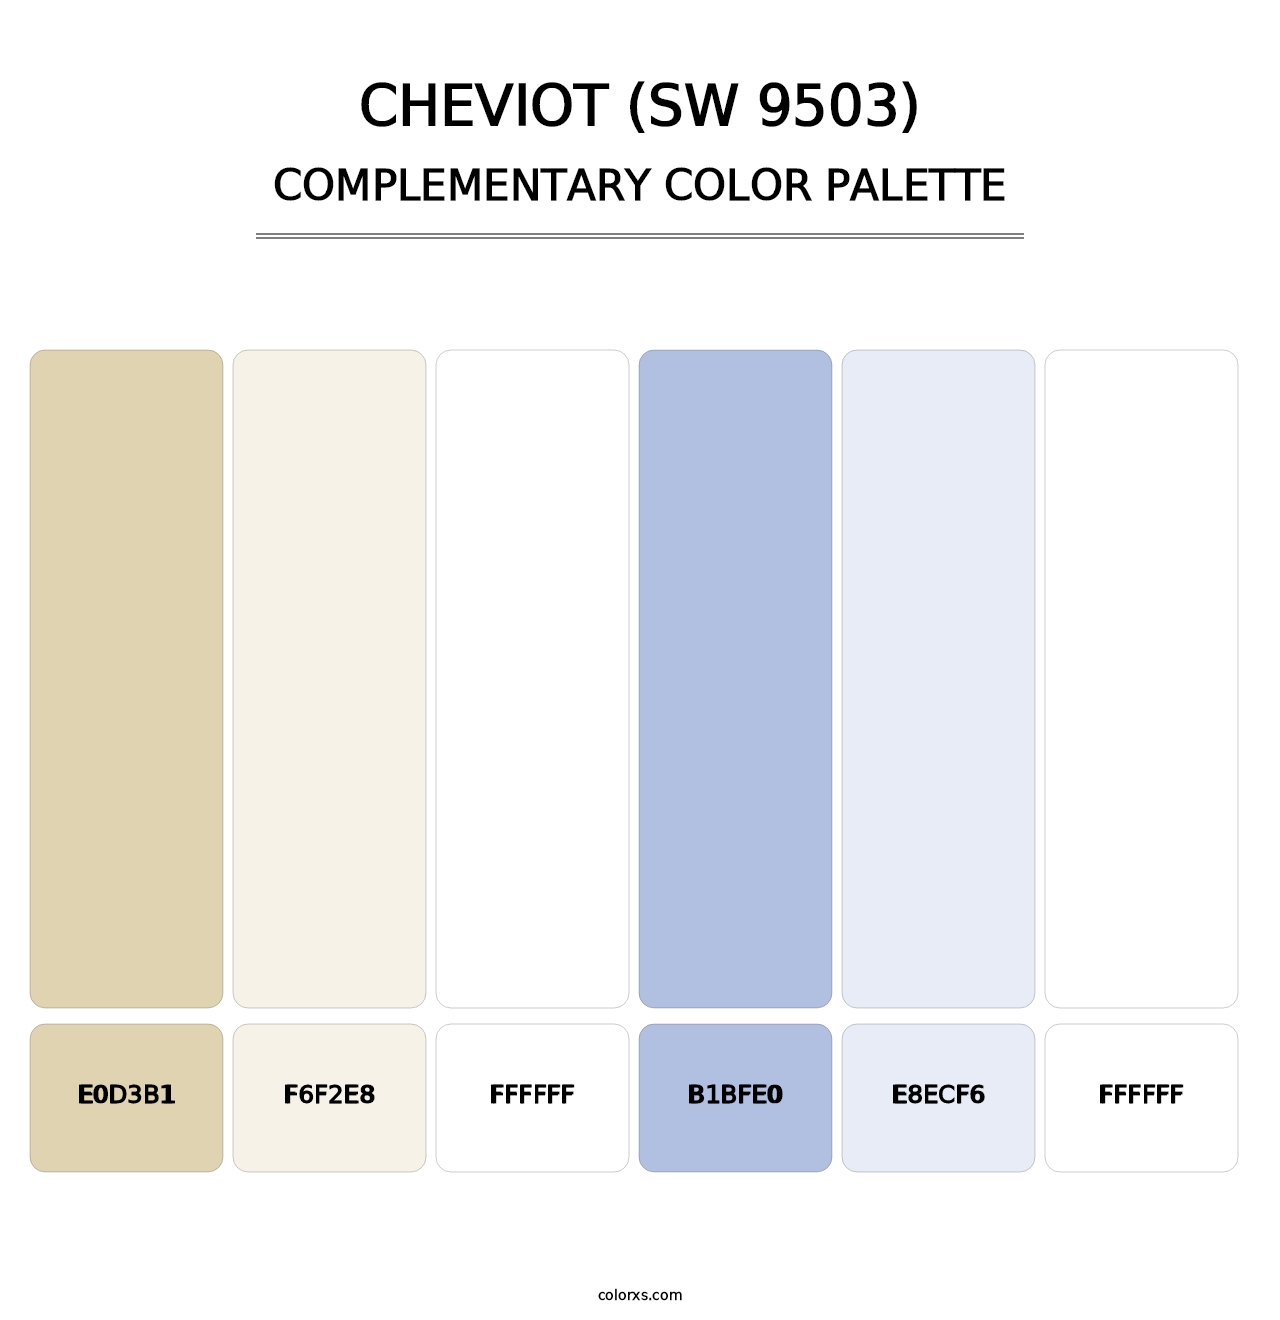 Cheviot (SW 9503) - Complementary Color Palette